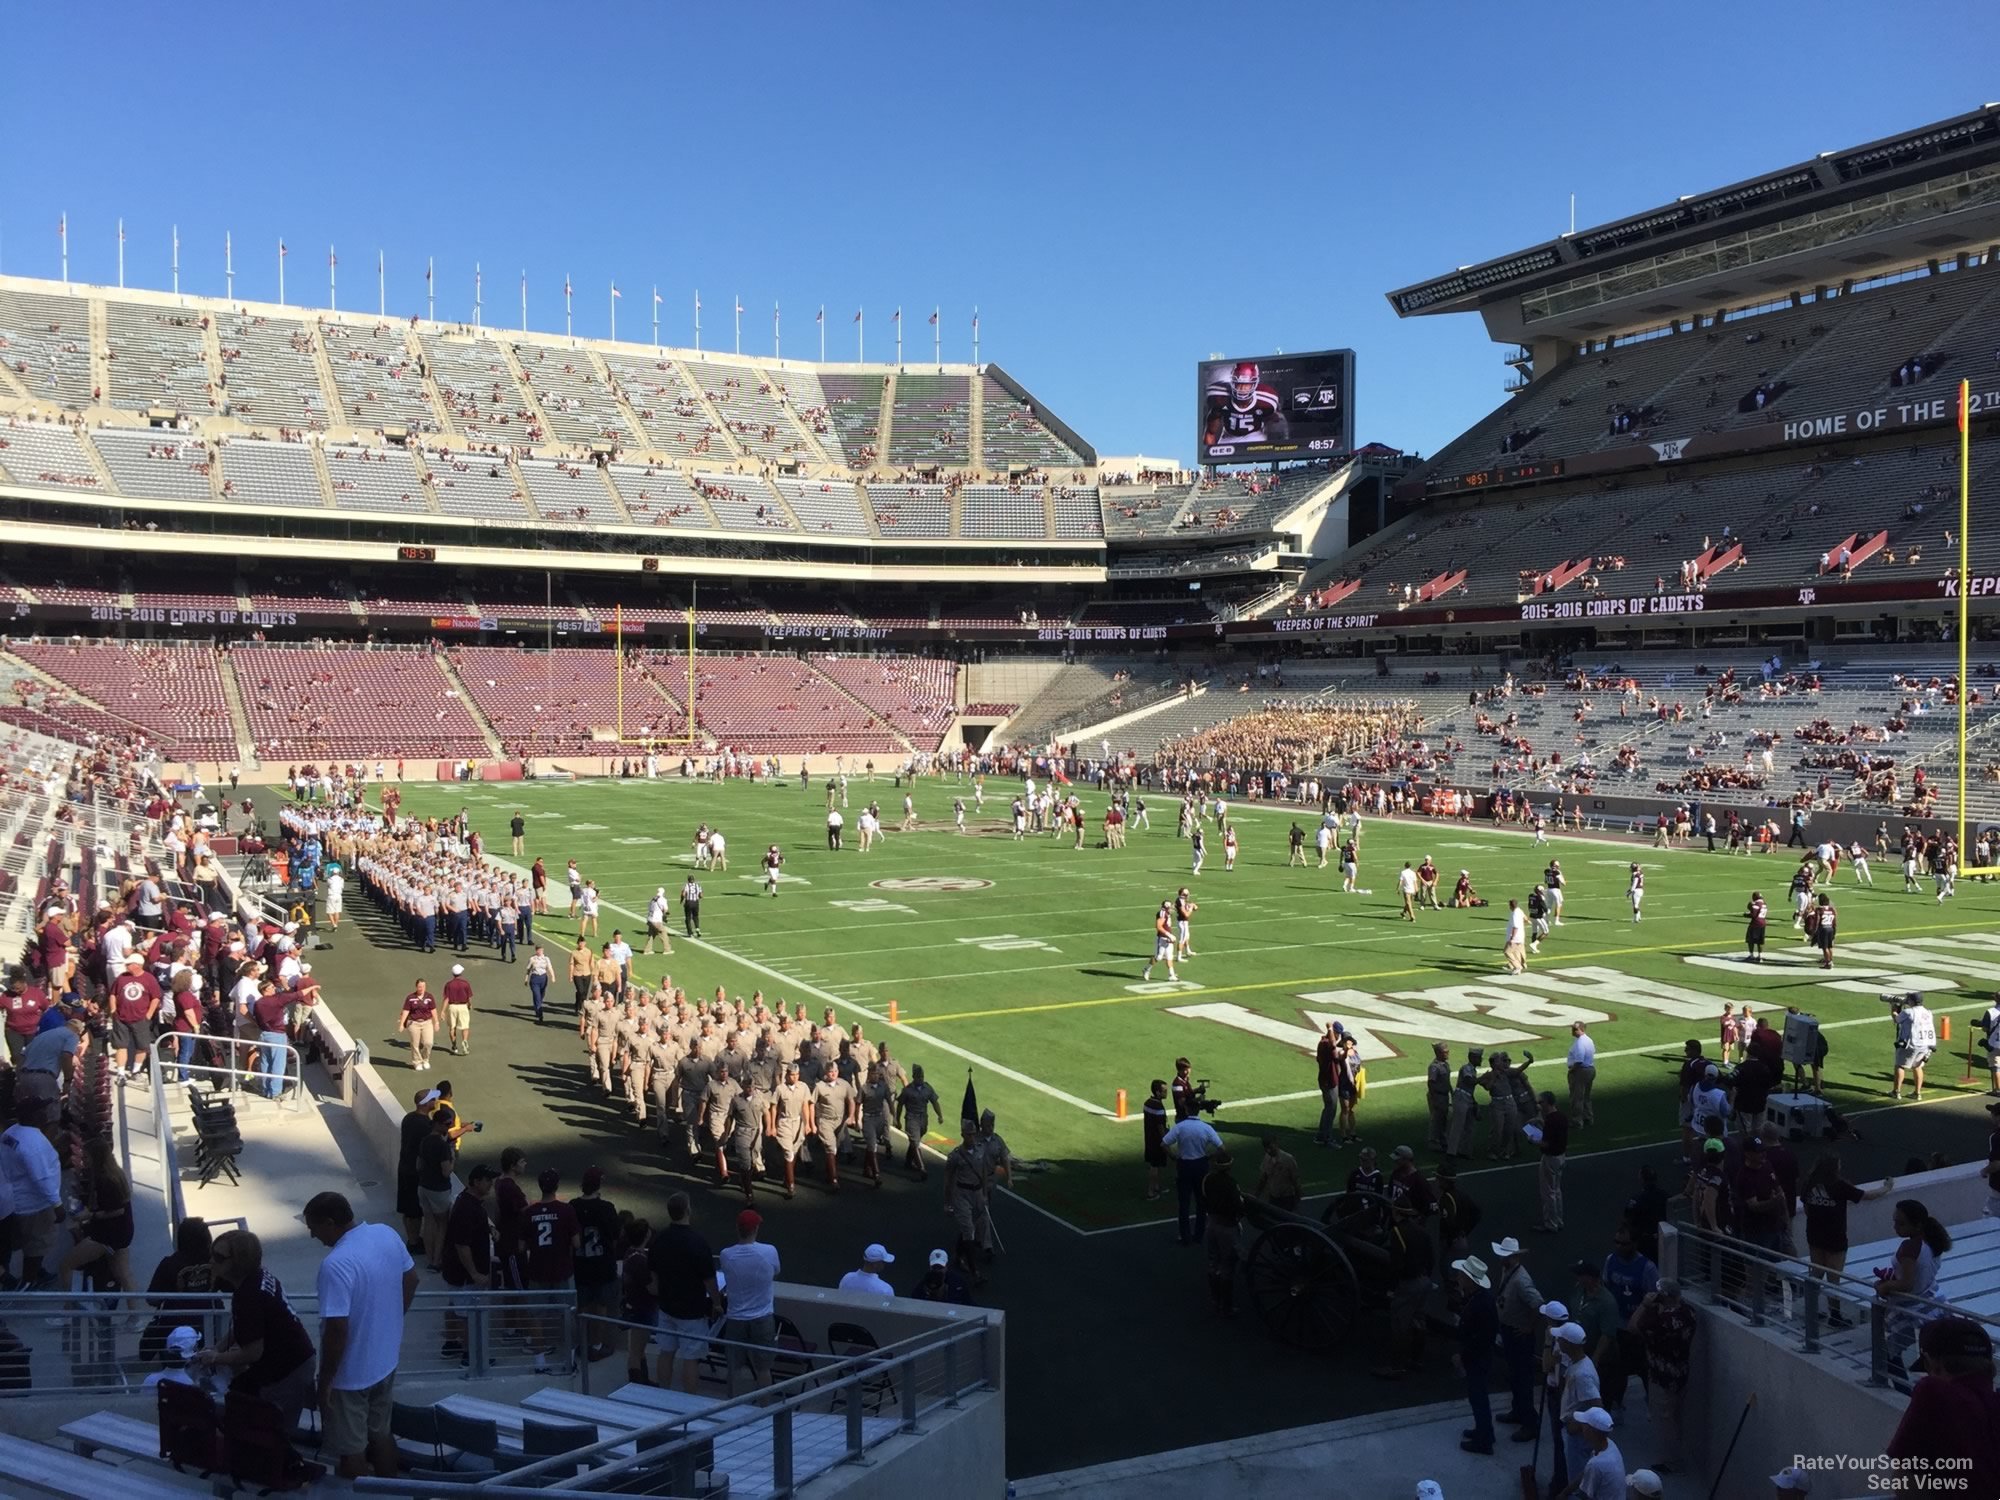 section 134, row 20 seat view  - kyle field